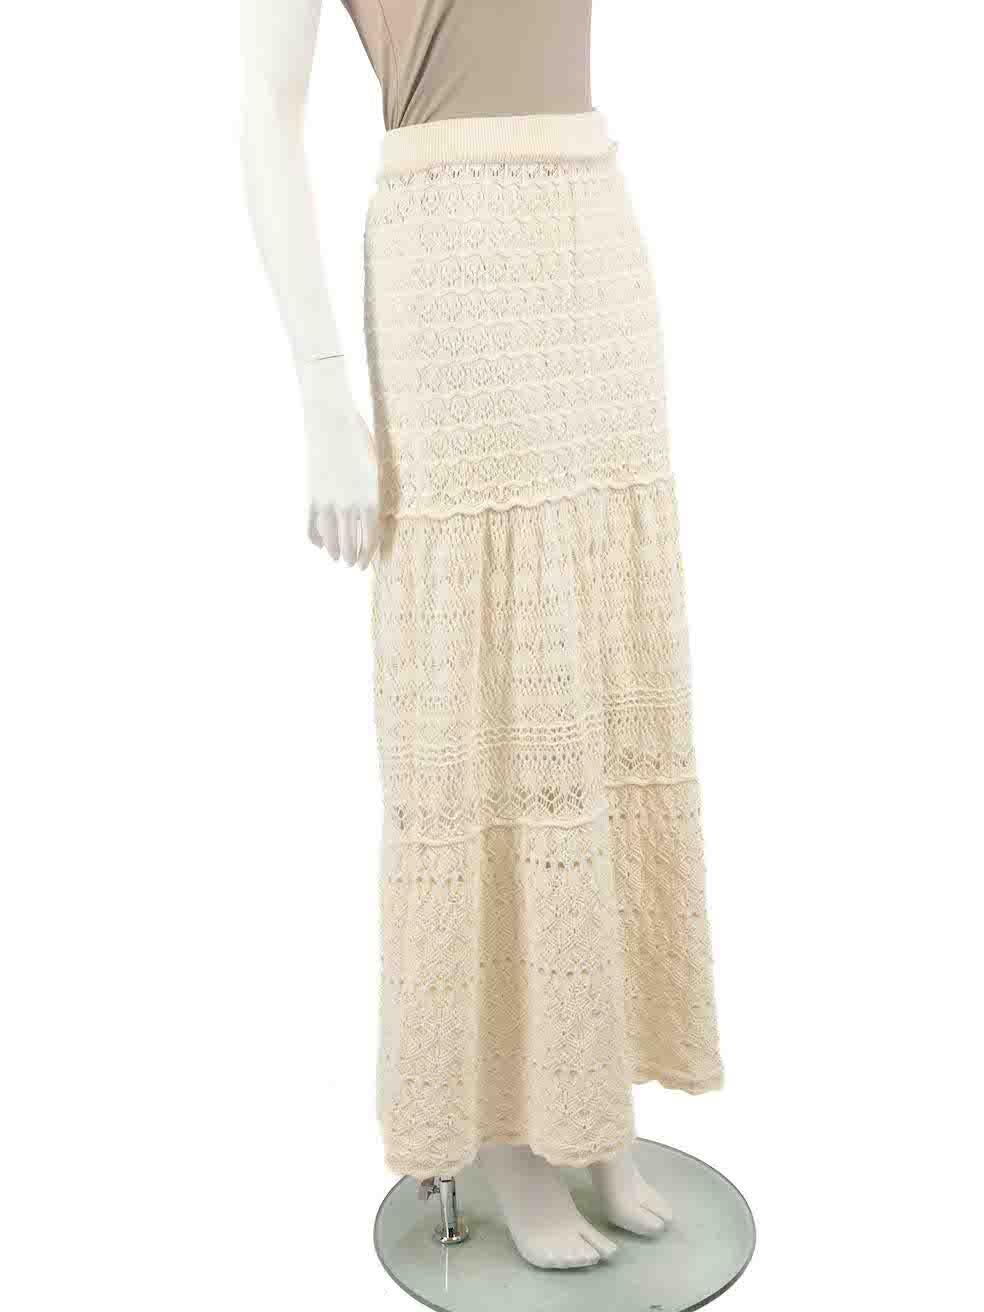 CONDITION is Very good. Minimal wear to skirt is evident. Minimal wear to the rear with a pluck to the knit on this used ba&sh designer resale item.
 
 
 
 Details
 
 
 Josh model
 
 Ecru
 
 Cotton
 
 Full skirt
 
 Maxi length
 
 Crochet knitted and